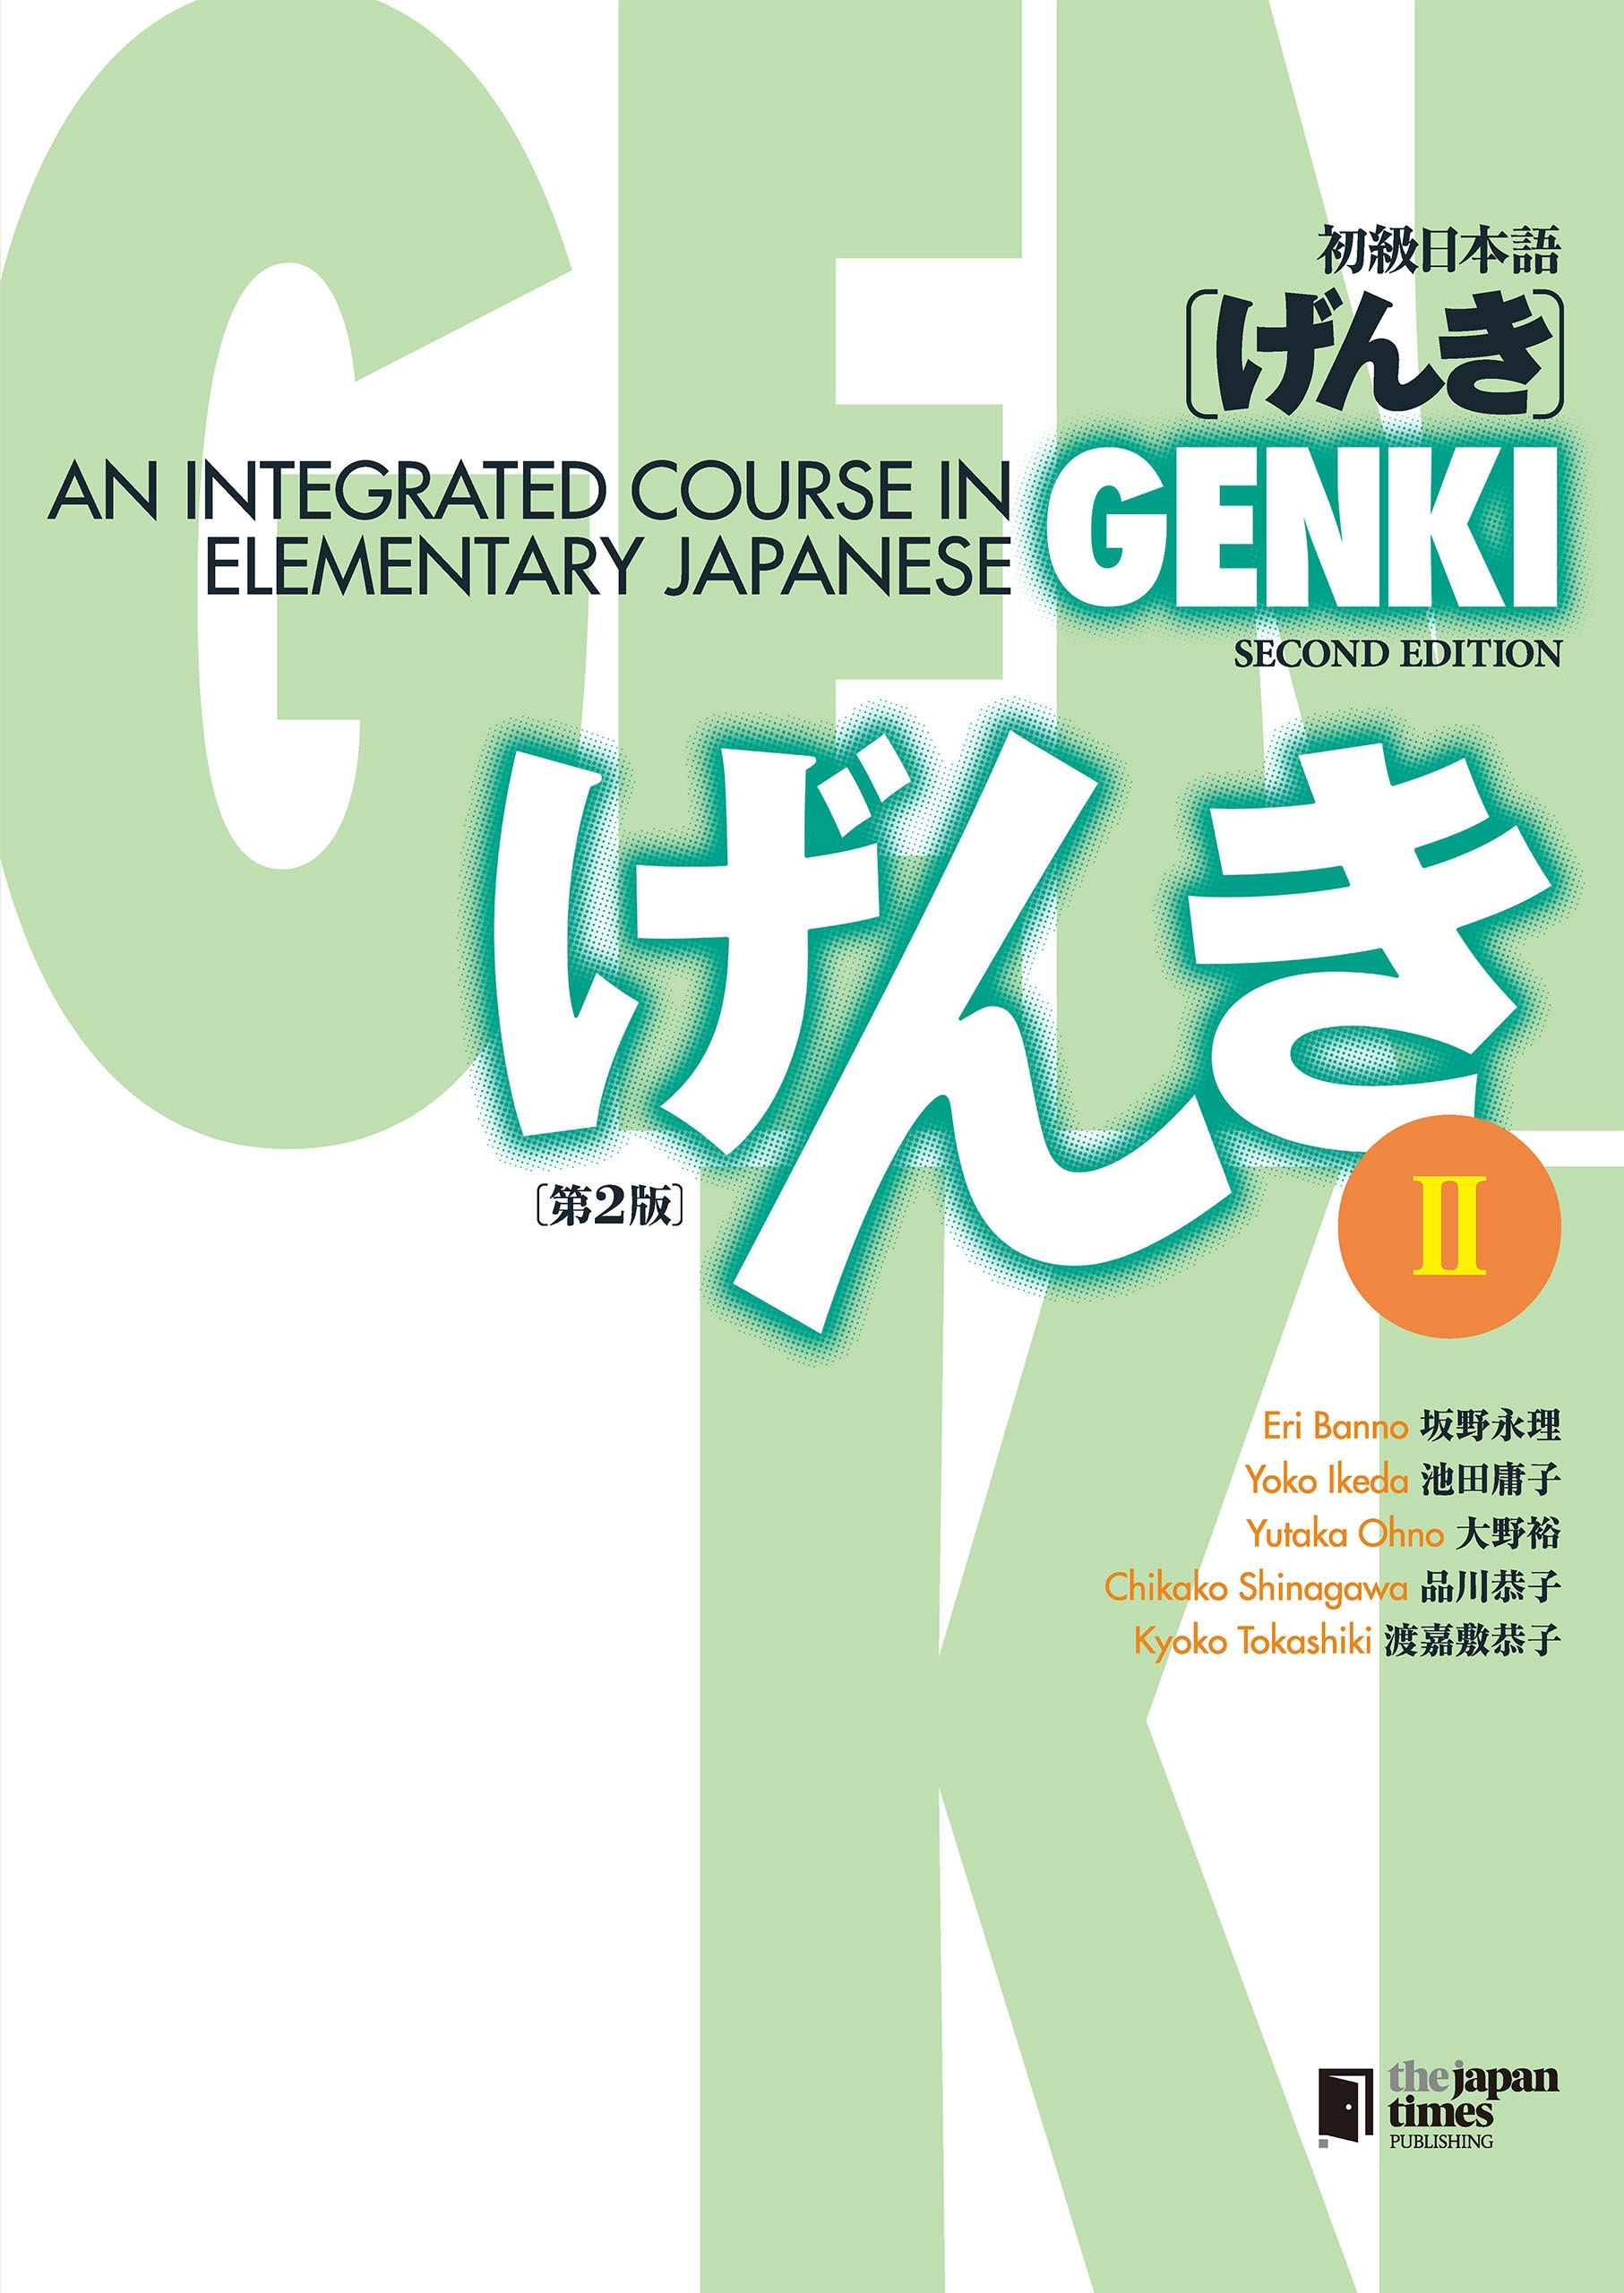 Elementary　GENKI:　[Second　Course　初級日本語　An　げんき　[第2版]1巻(最新刊)|坂野永理,池田庸子,大野裕|人気マンガを毎日無料で配信中!　Integrated　II　in　II　無料・試し読み・全巻読むならAmebaマンガ　Japanese　Edition]